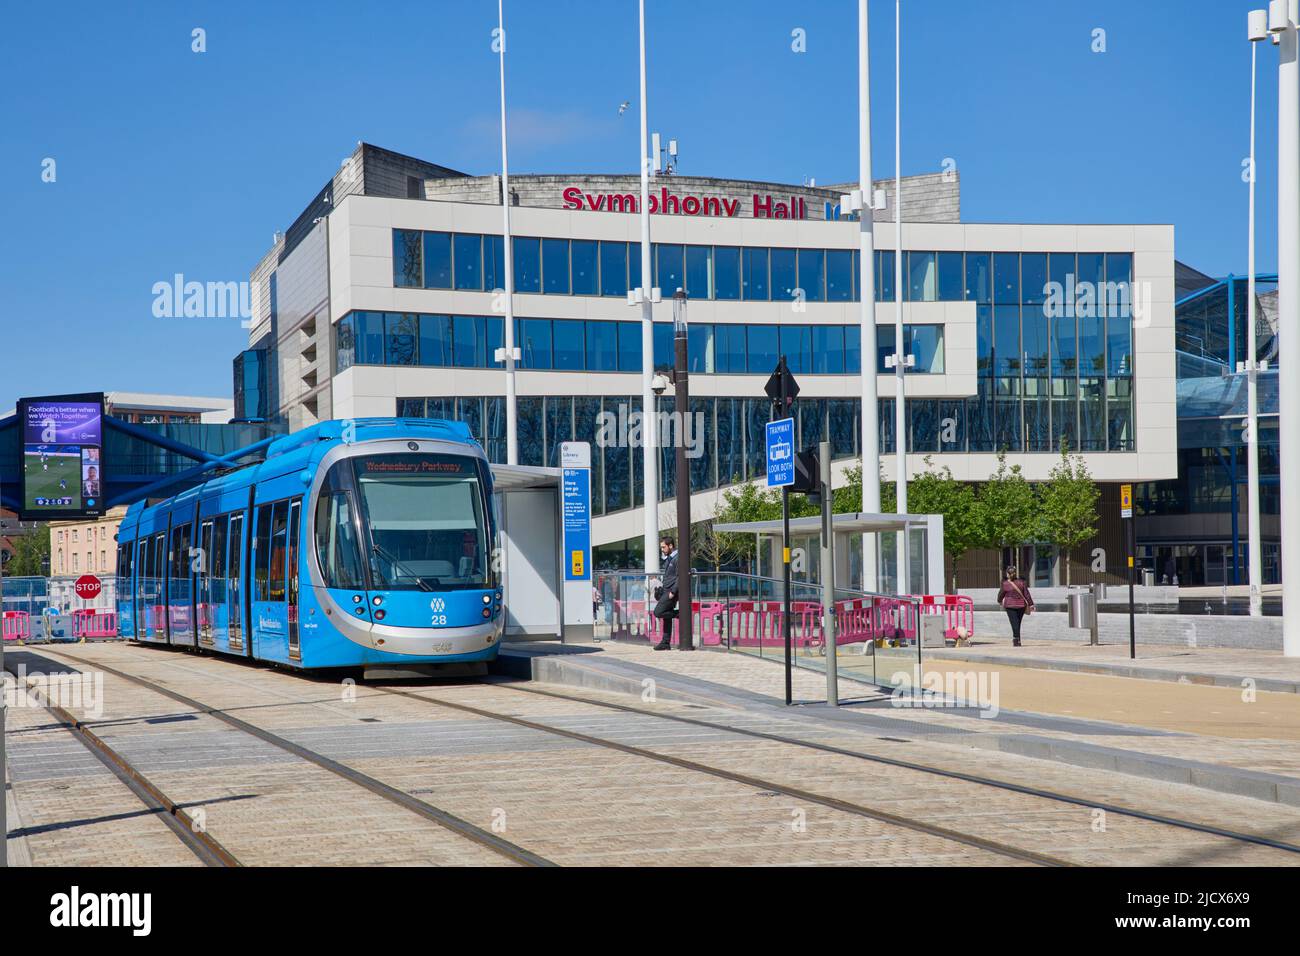 View of tram in front of Repertory Theatre, Centenary Square, Birmingham, West Midlands, England, United Kingdom, Europe Stock Photo